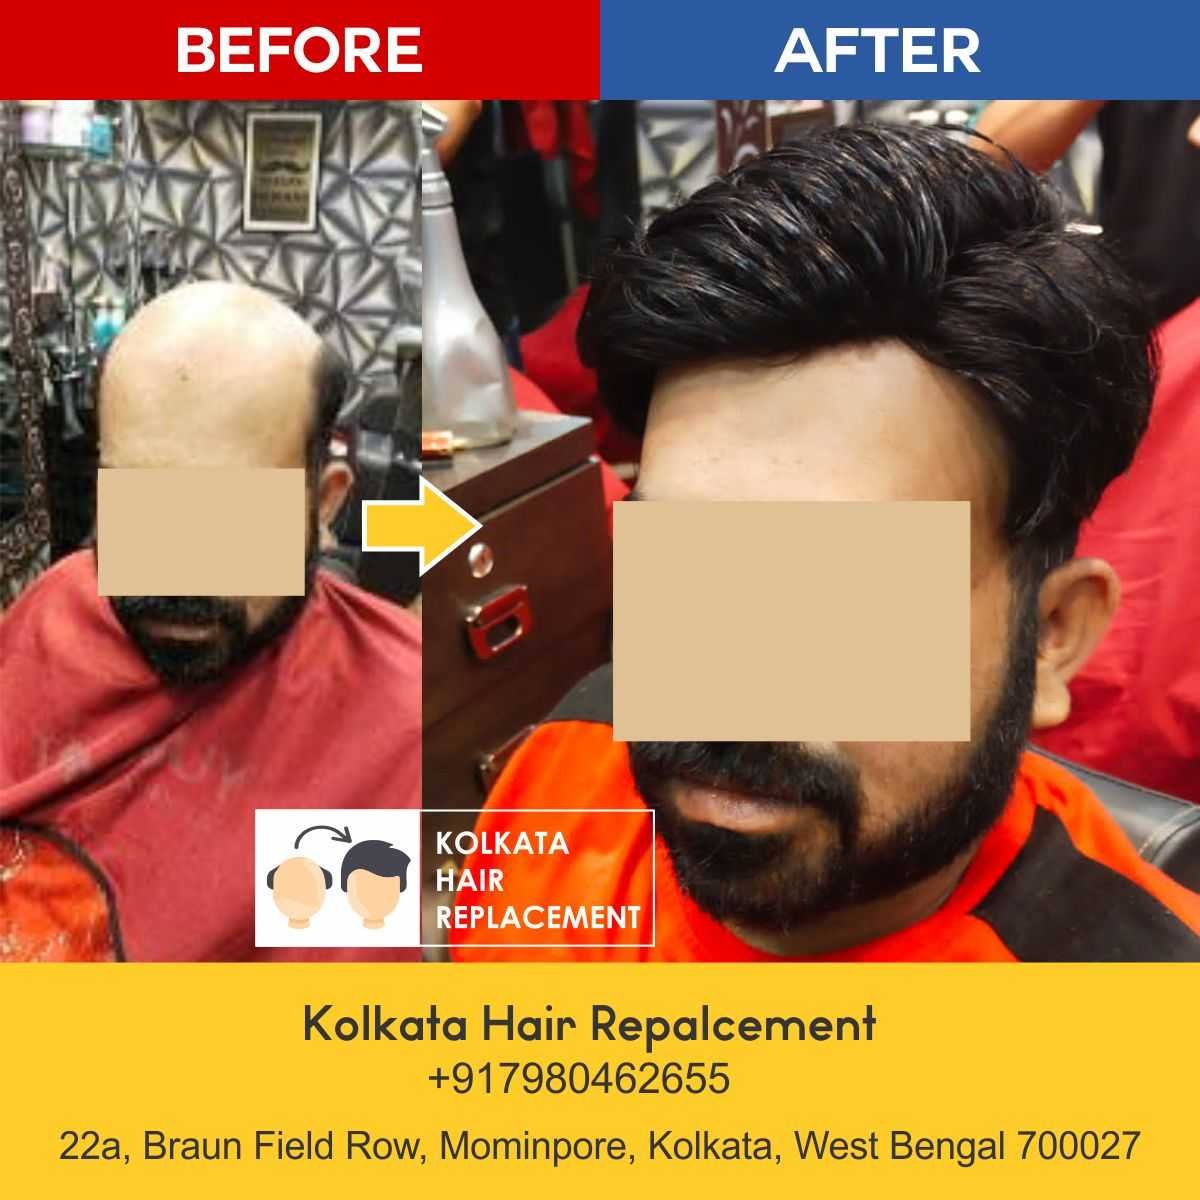 men-hair-wig-patch-kolkata-hair-replacement-before-after-04